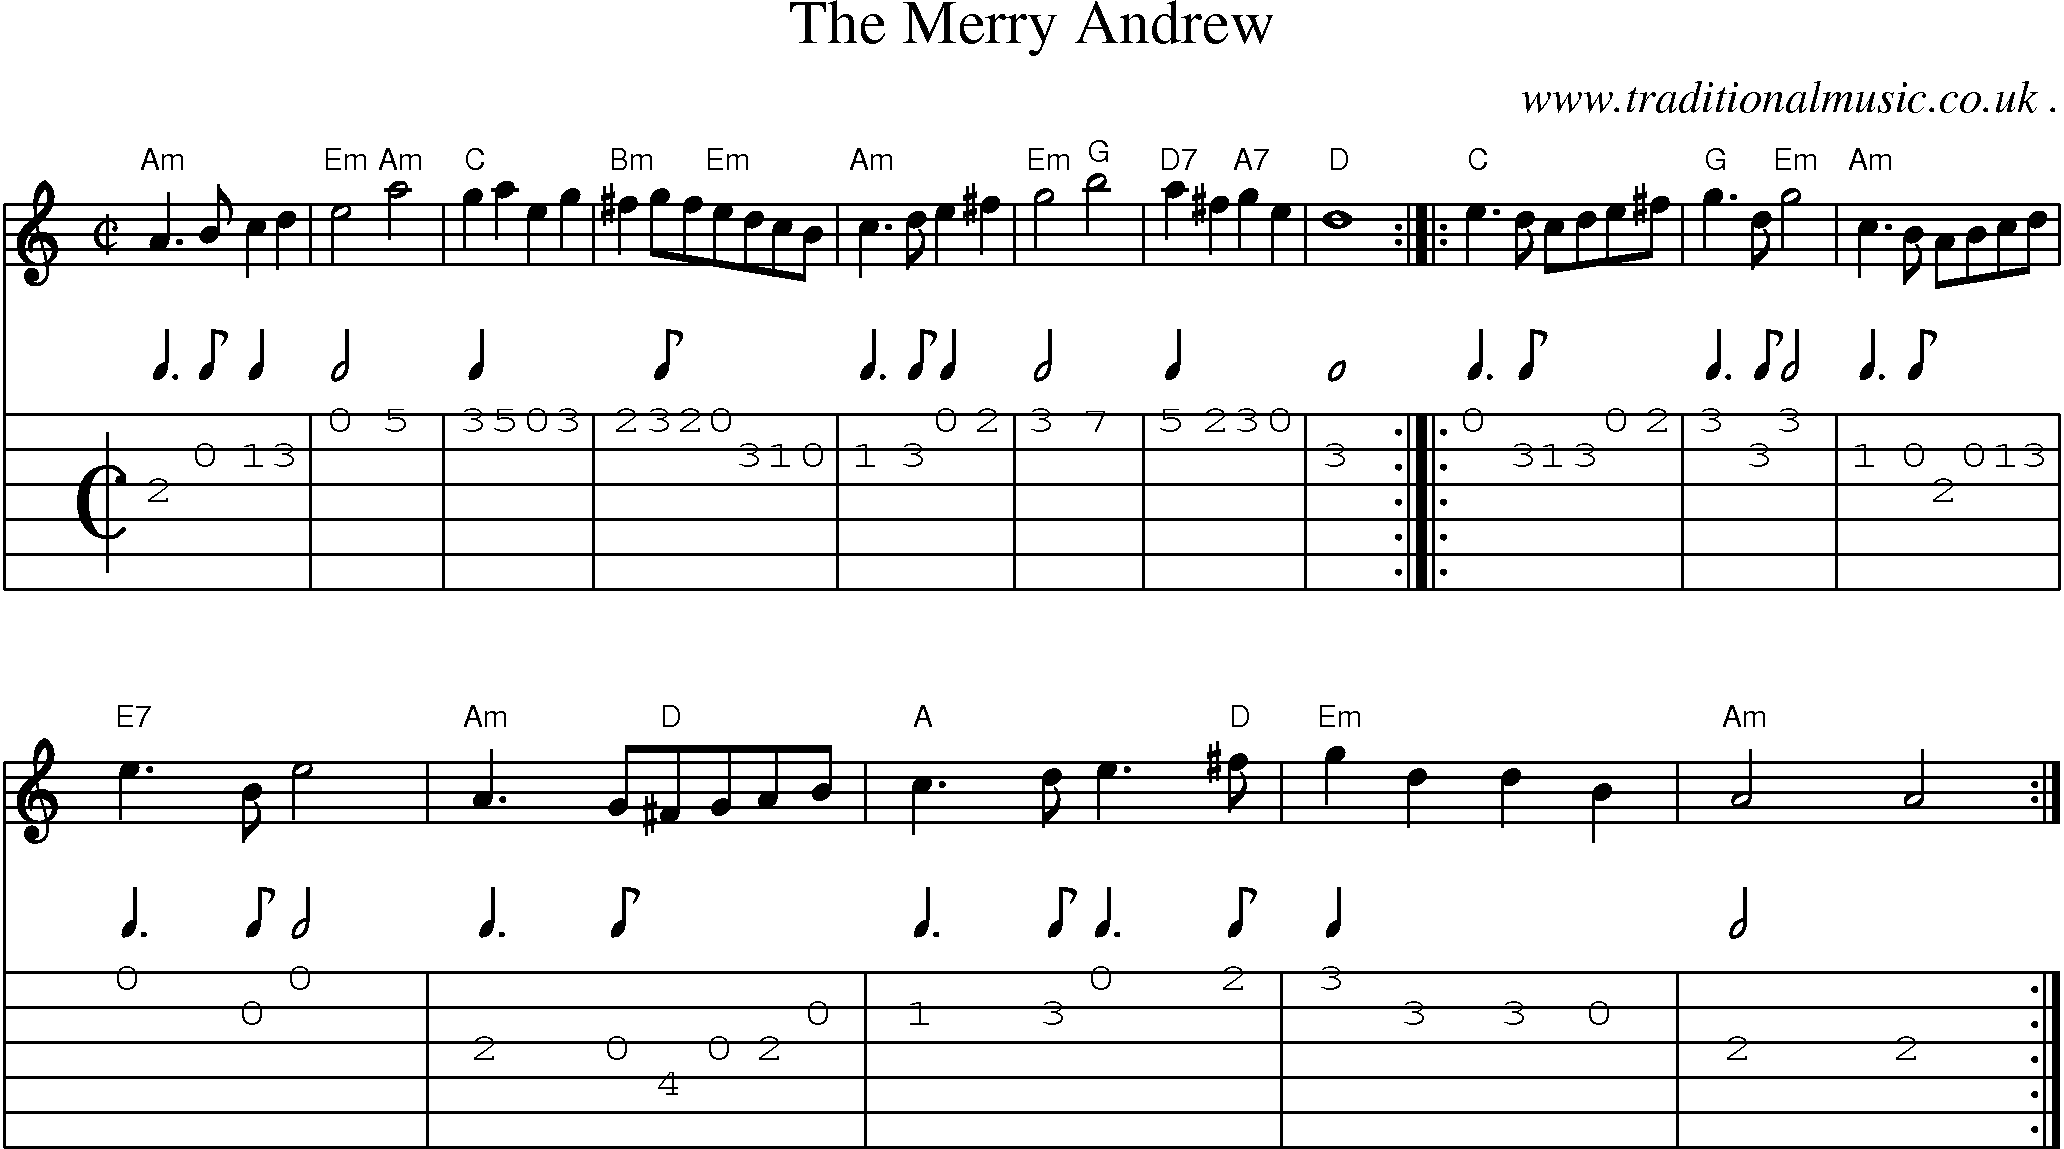 Sheet-Music and Guitar Tabs for The Merry Andrew